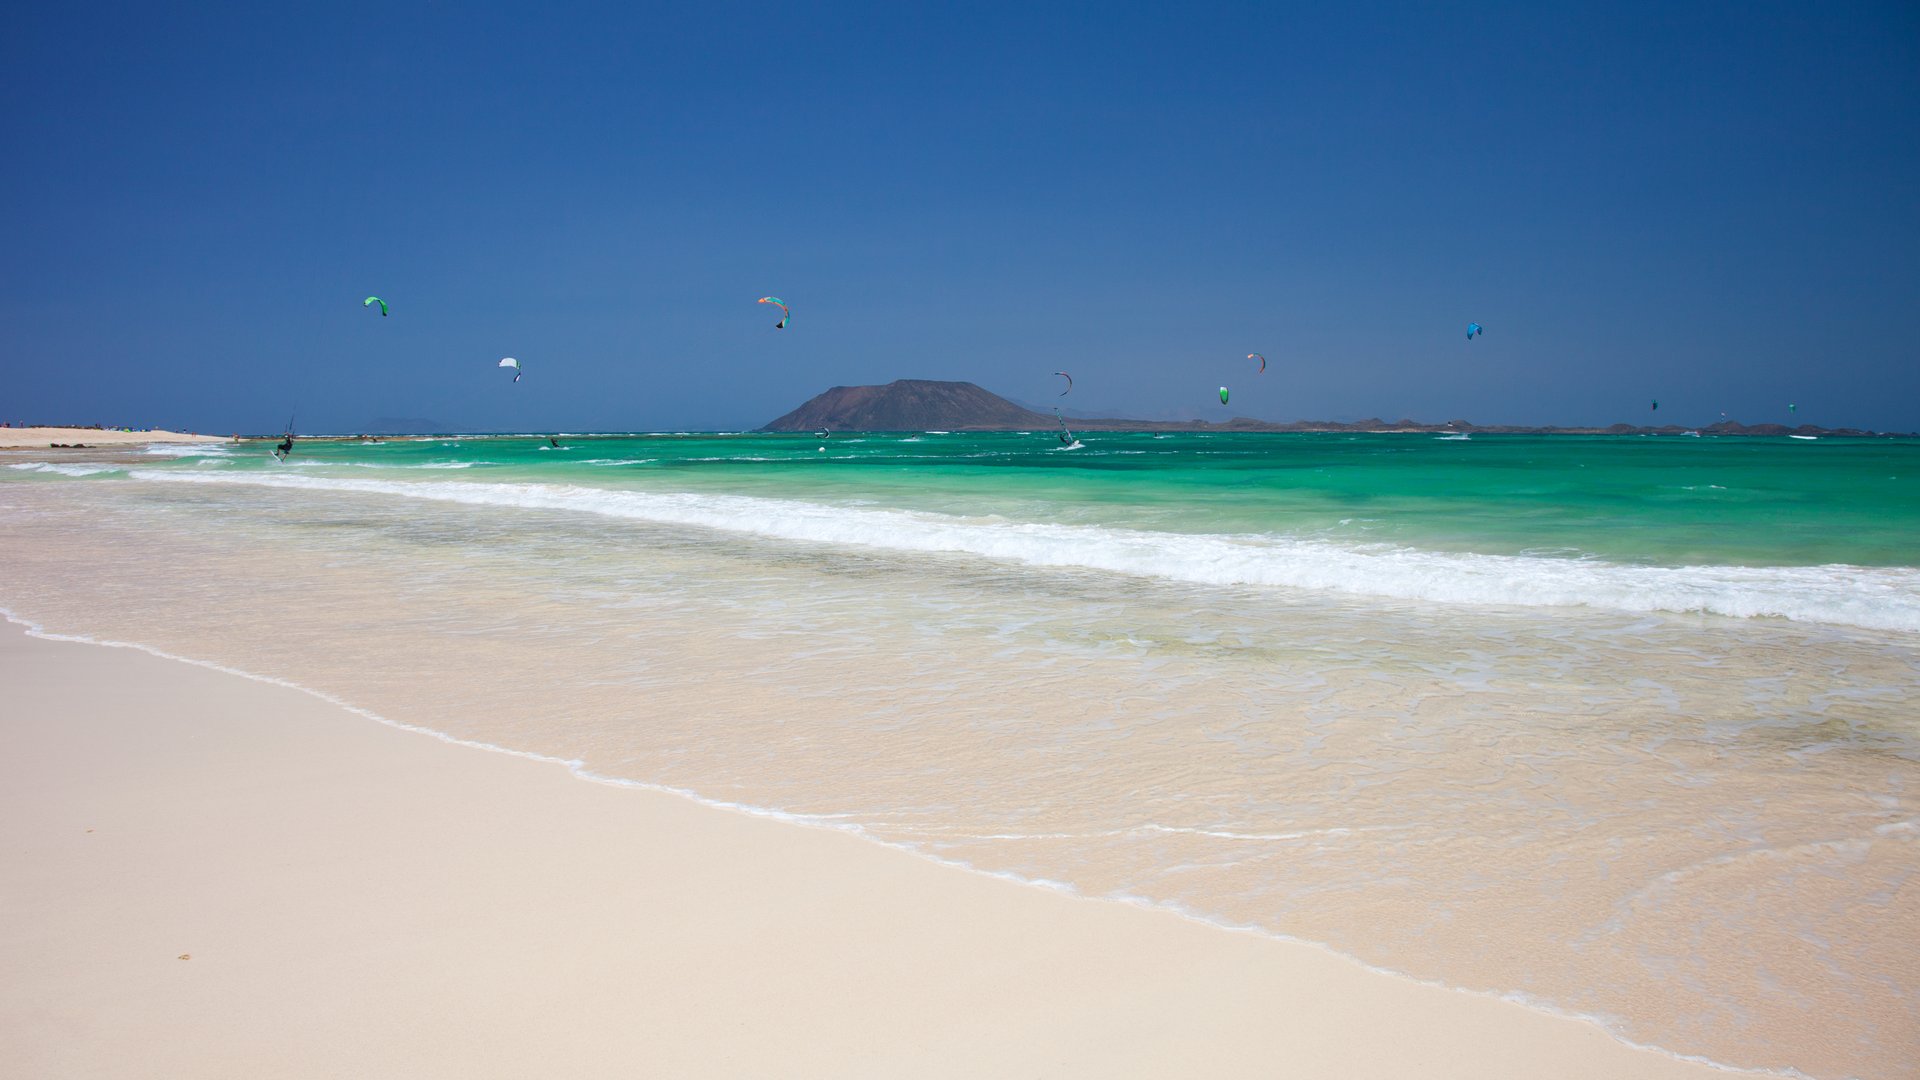 Flag Beach Kitebsurfing in Fuerteventura white sand and turquoise water and a picturesque hill in the background looking like an island